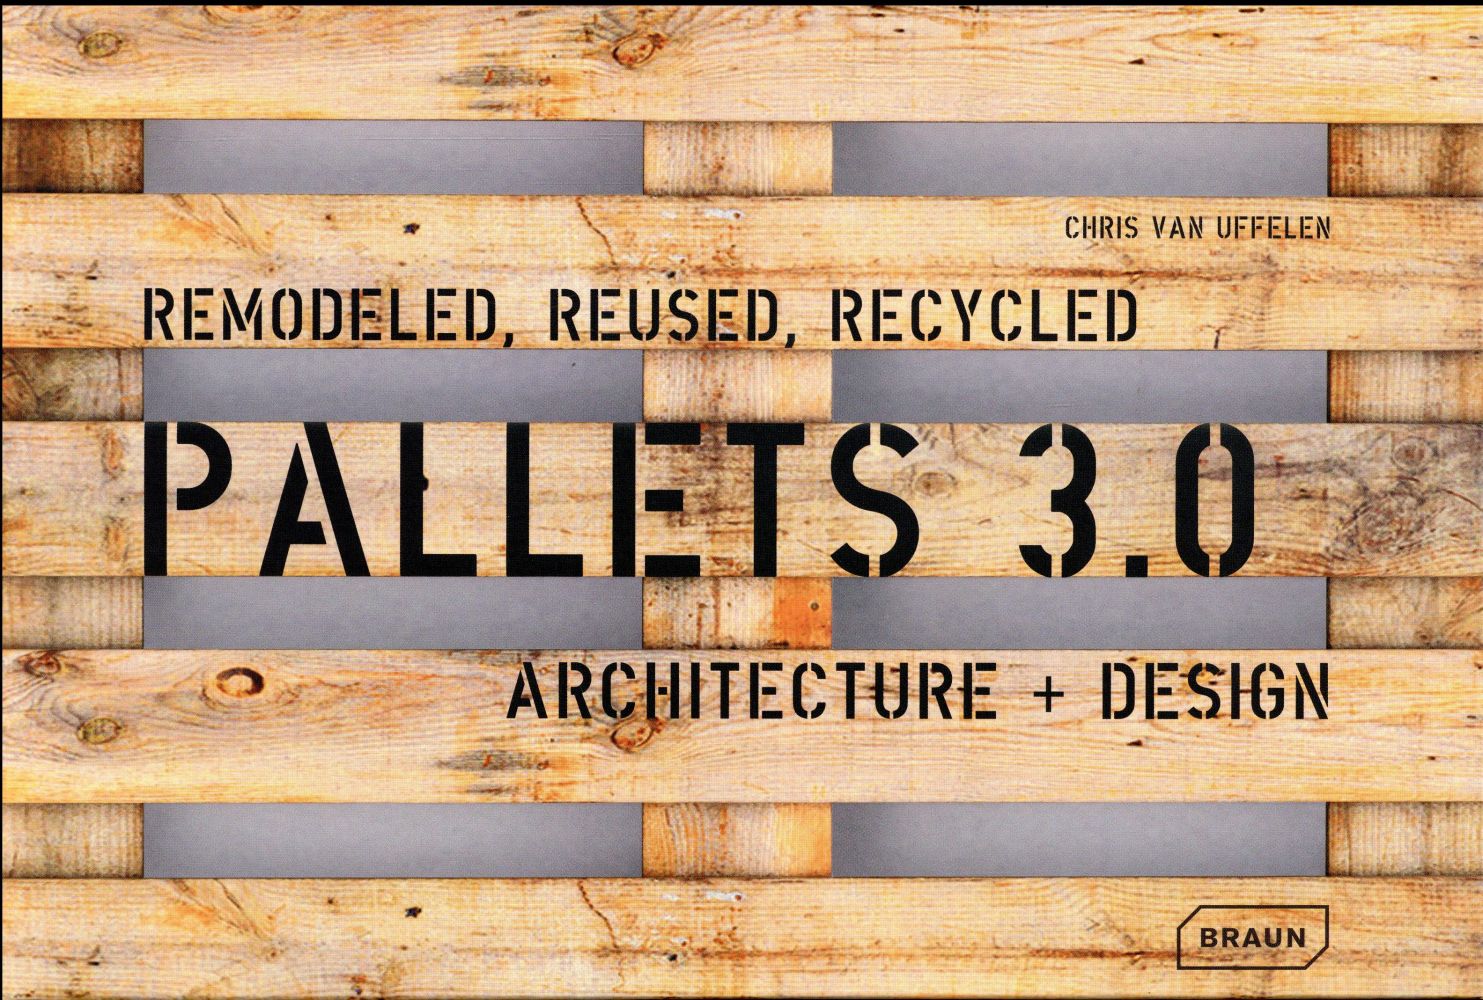 PALLETS 3.0. REMODELED, REUSED, RECYCLED - ARCHITECTURE + DESIGN